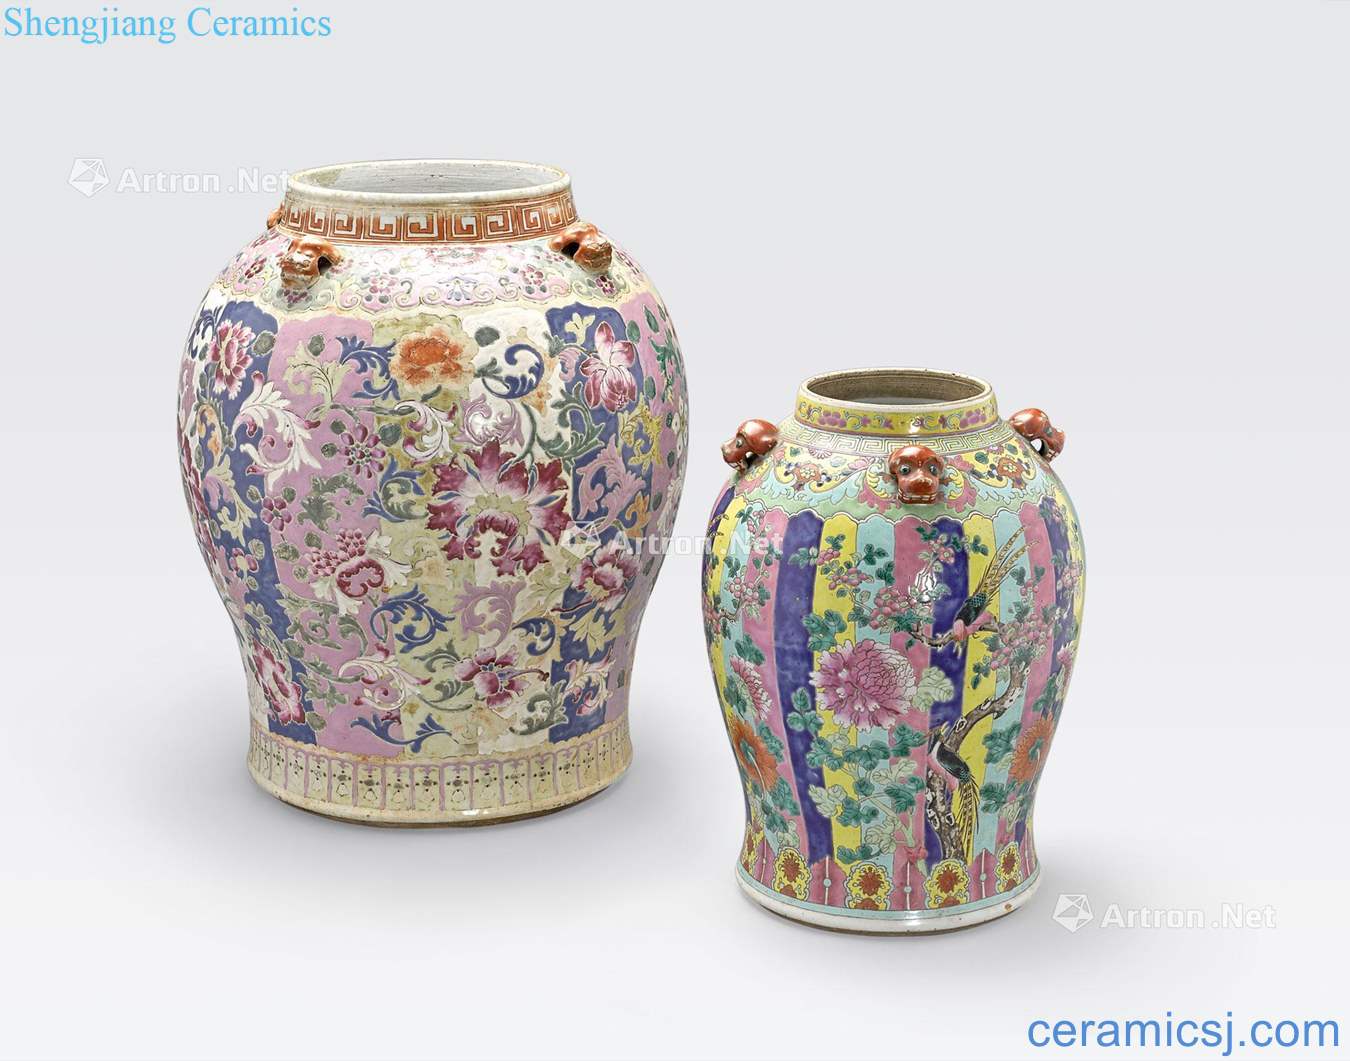 The 19 th century TWO FAMILLE ROSE ENAMELED GINGER JARS WITH VERTICAL STRIPE BACKGROUNDS